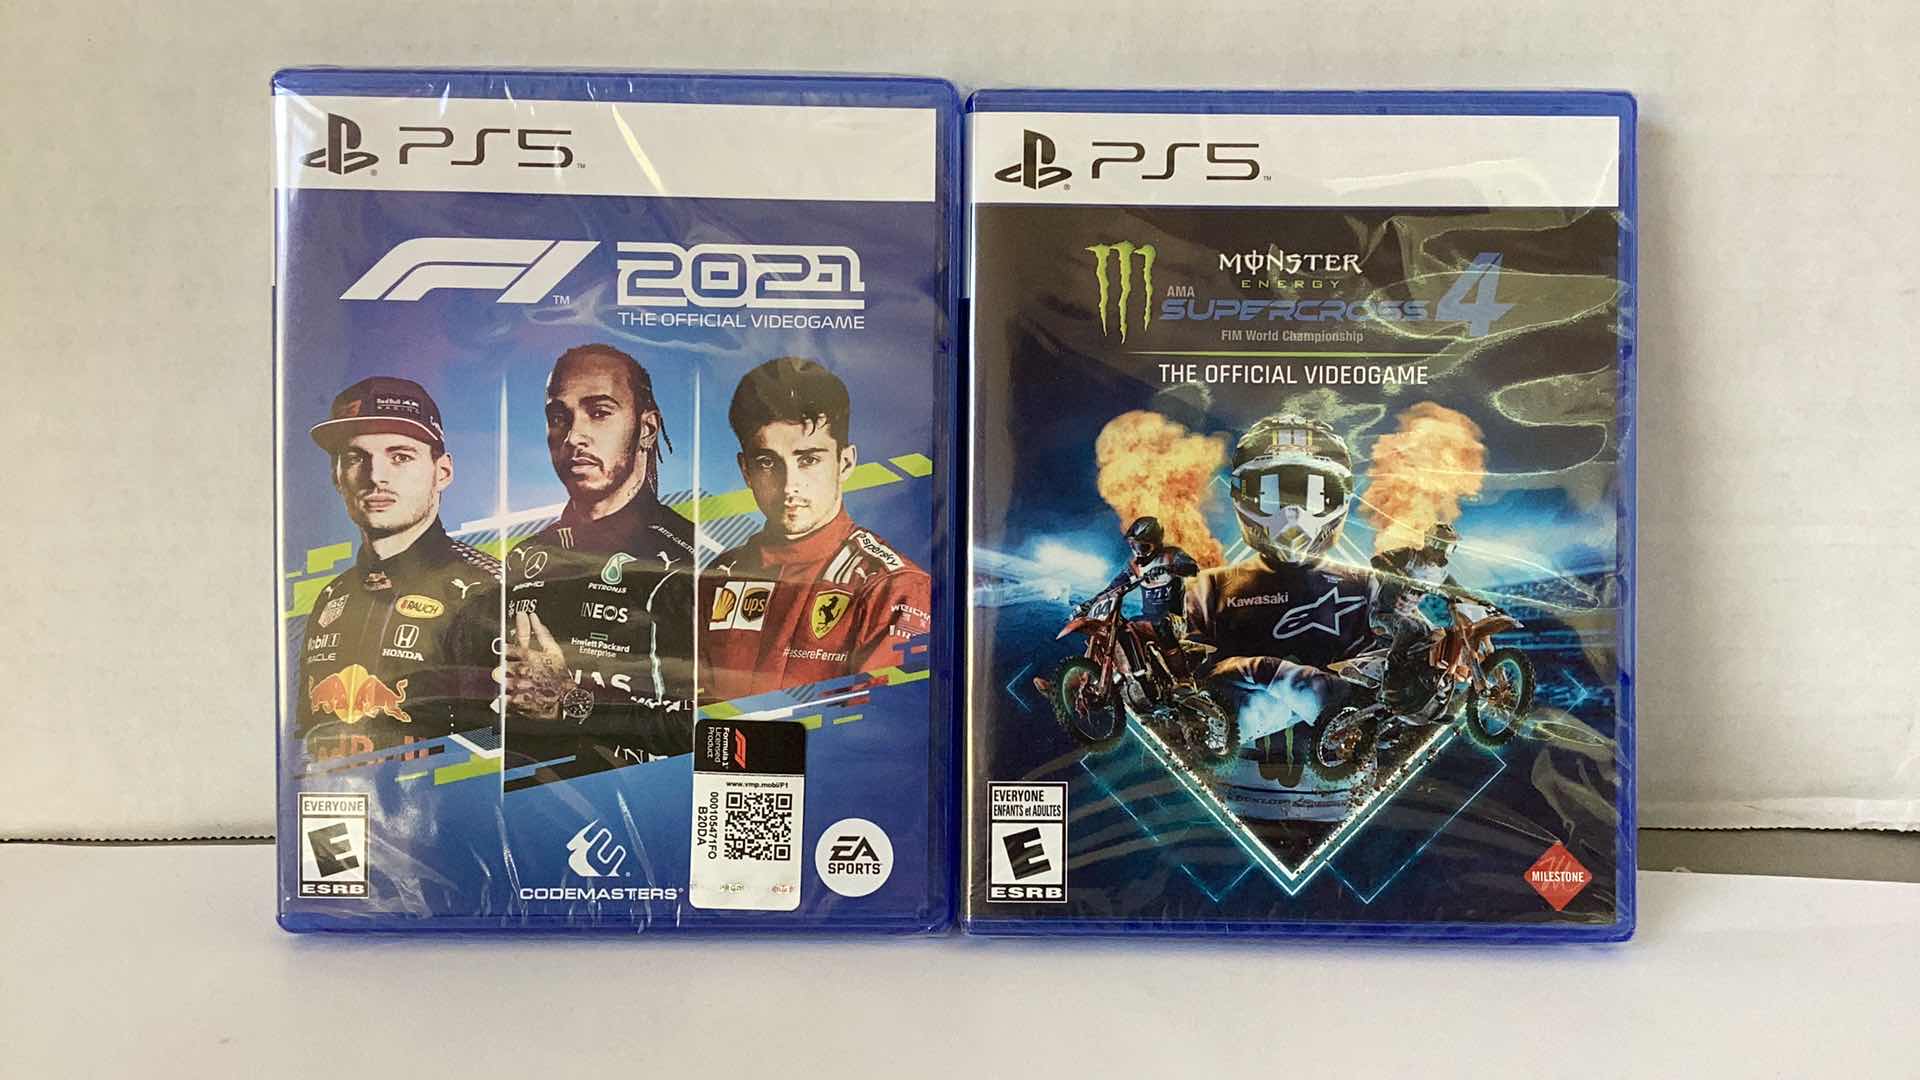 Photo 1 of 2 NEW PS5 GAMES: F1 2021 AND MONSTER ENERGY SUPERCROSS 4